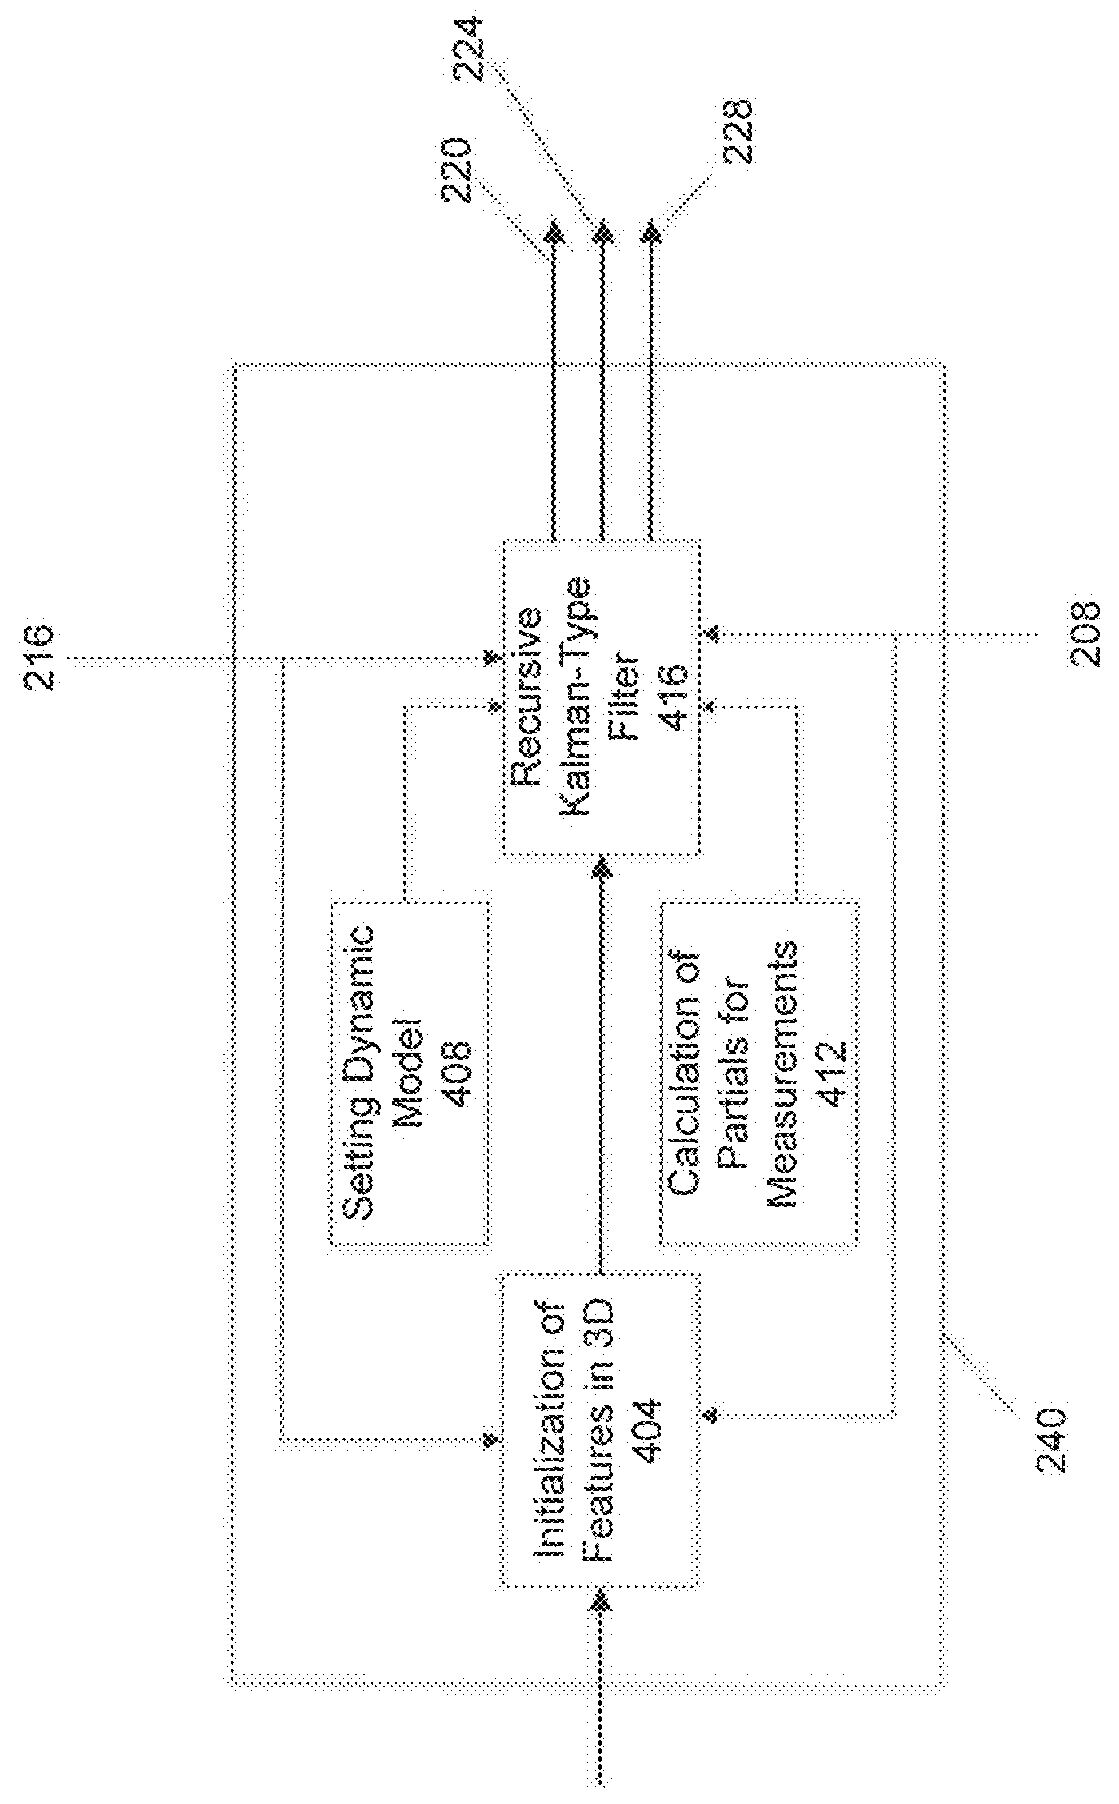 Video-assisted landing guidance system and method